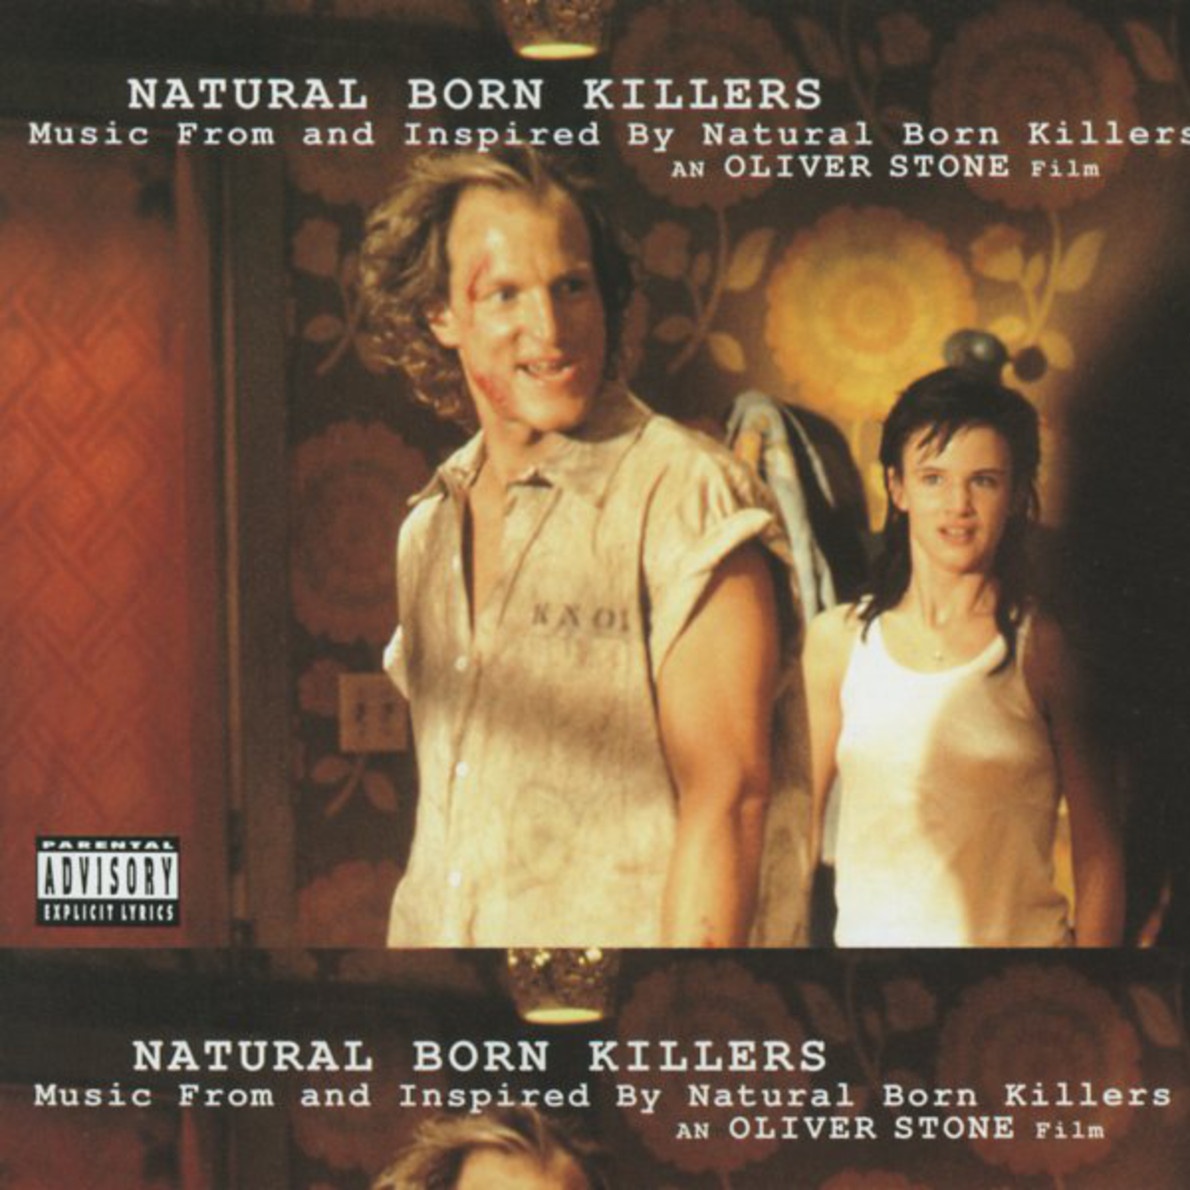 The Day The Niggaz Took Over - From "Natural Born Killers" Soundtrack